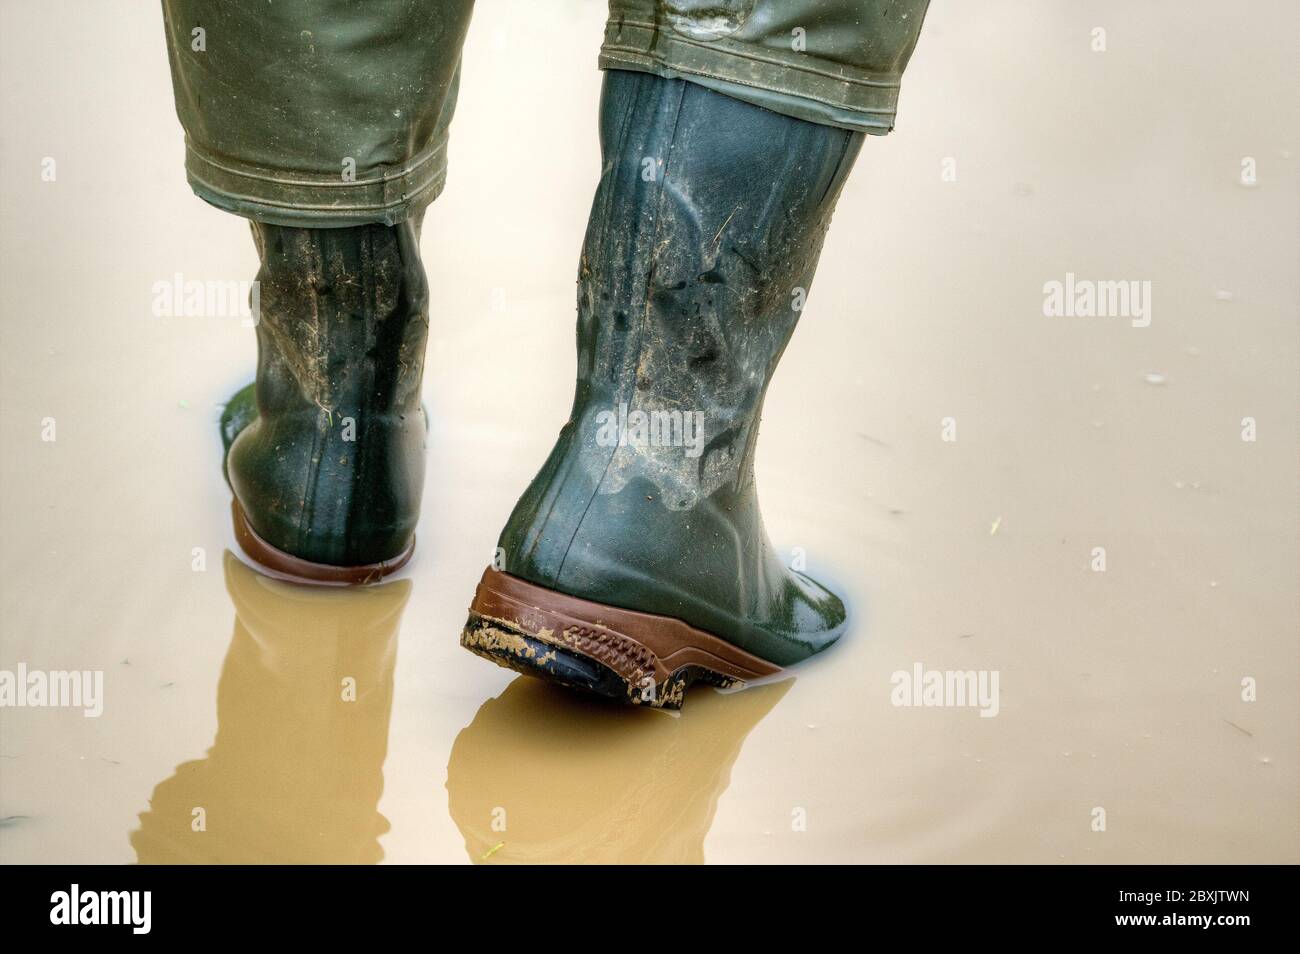 When the rain puddles grow outside in the autumn, it's time to put on the rubber boots. Stock Photo